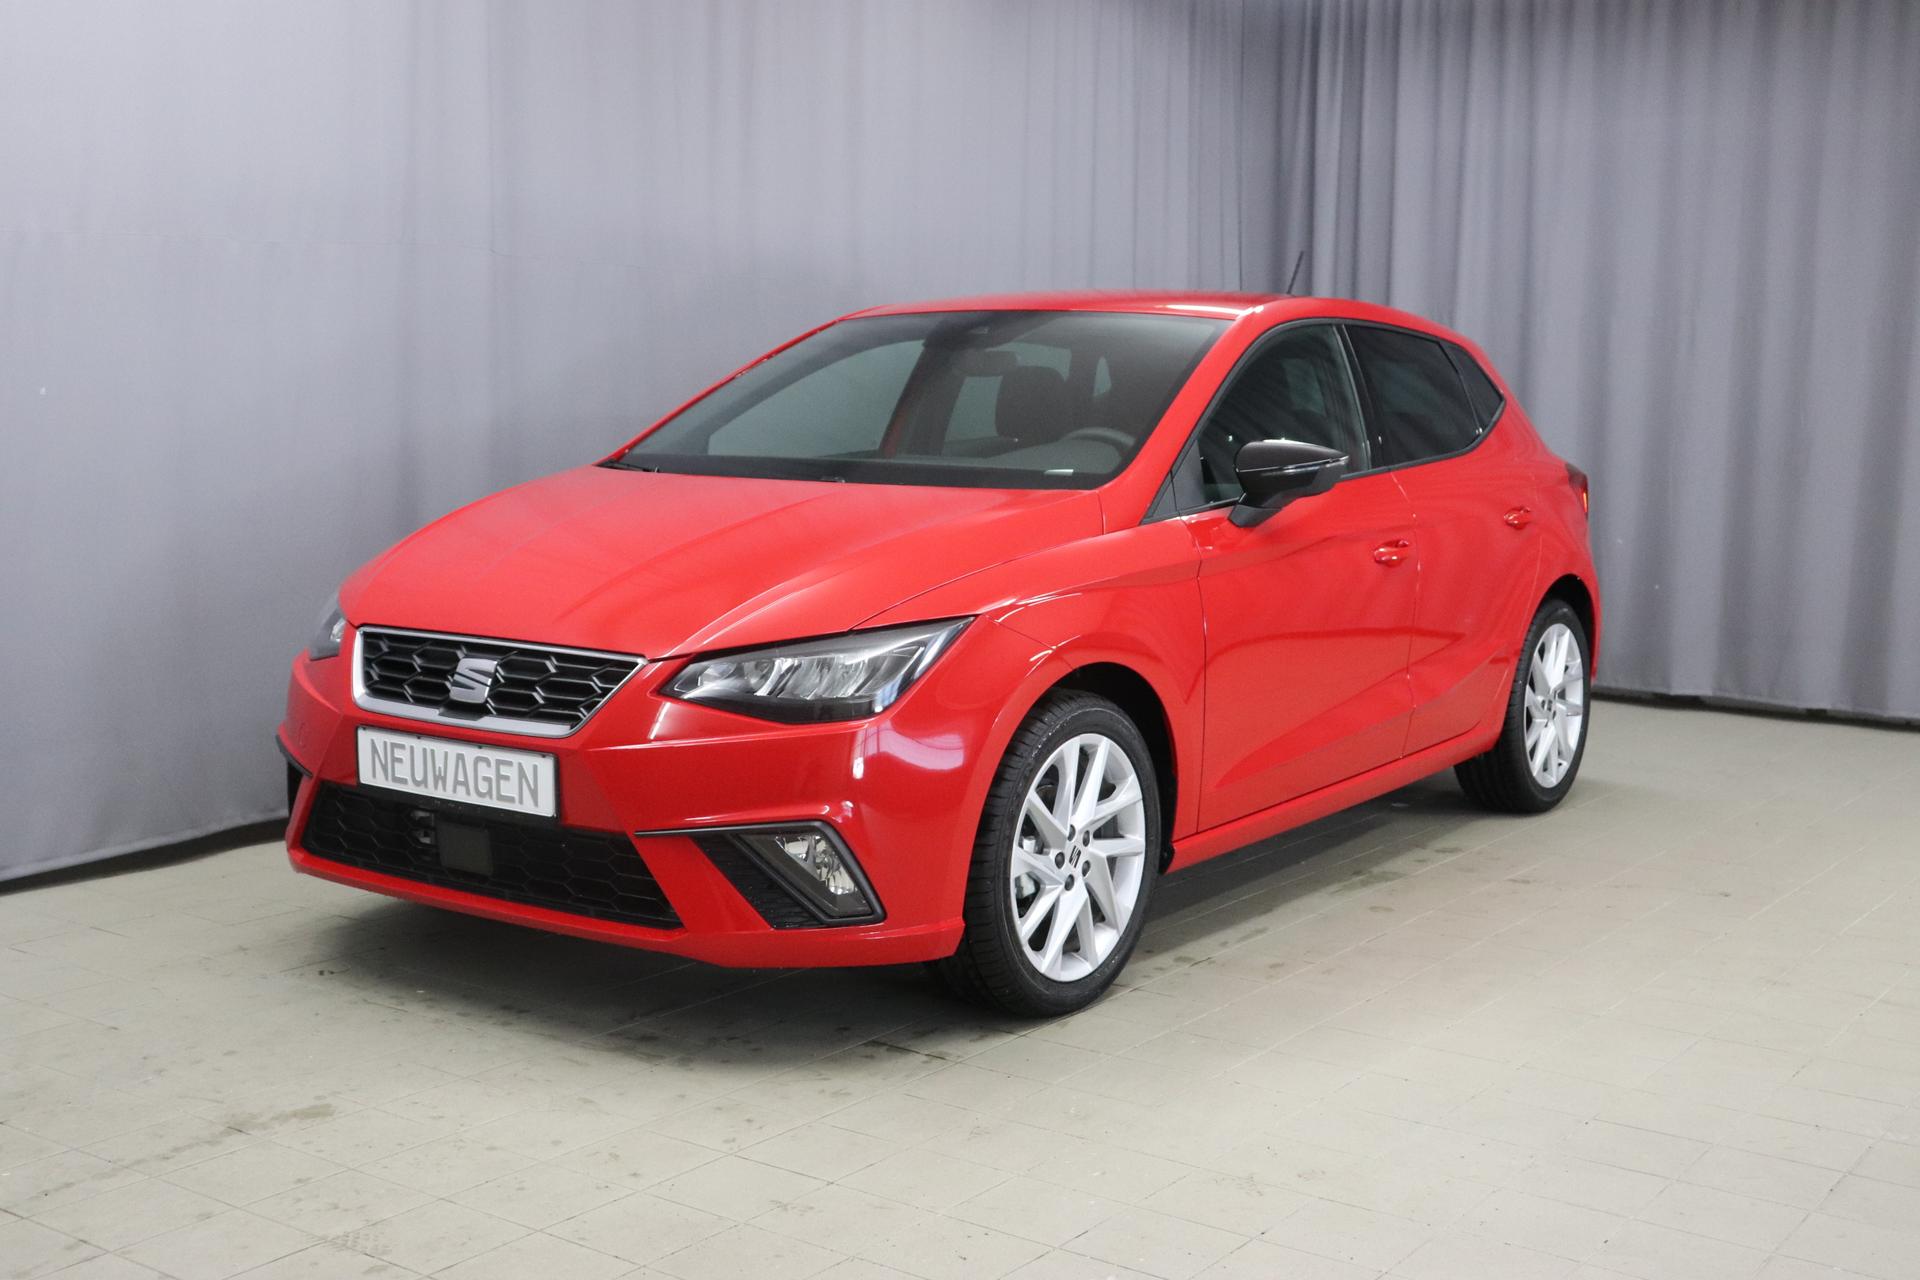 Seat Ibiza 1.0 MPI FR 59kW		Pure Red	Stoff LE MANS (Schwarz/Dunkelblau)	Privacy Glass